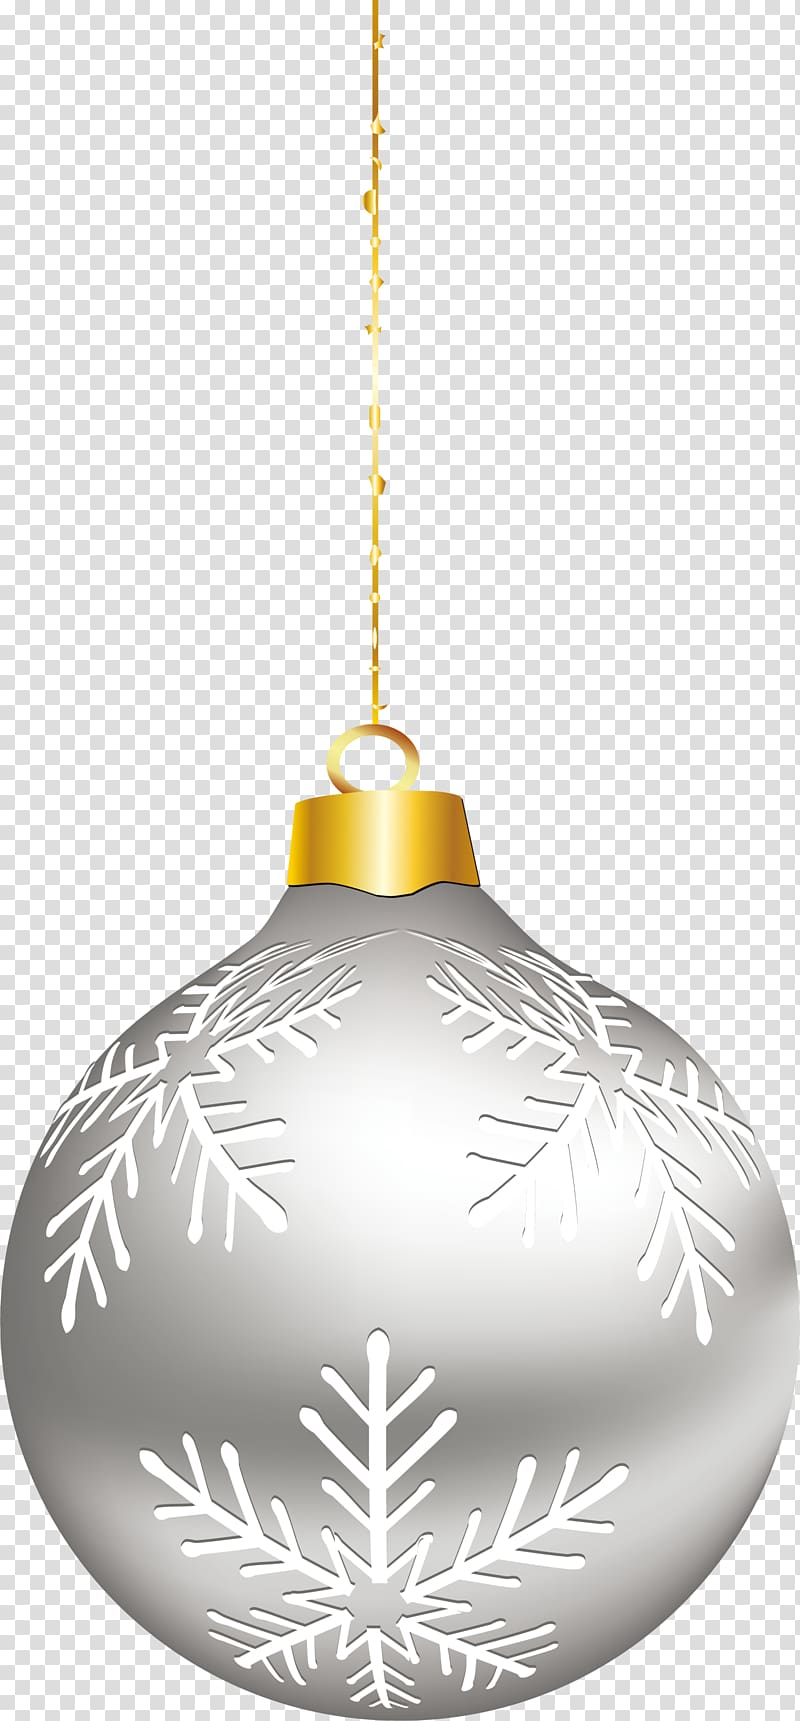 Christmas ornament Silver, Simple silver ornaments transparent background PNG clipart